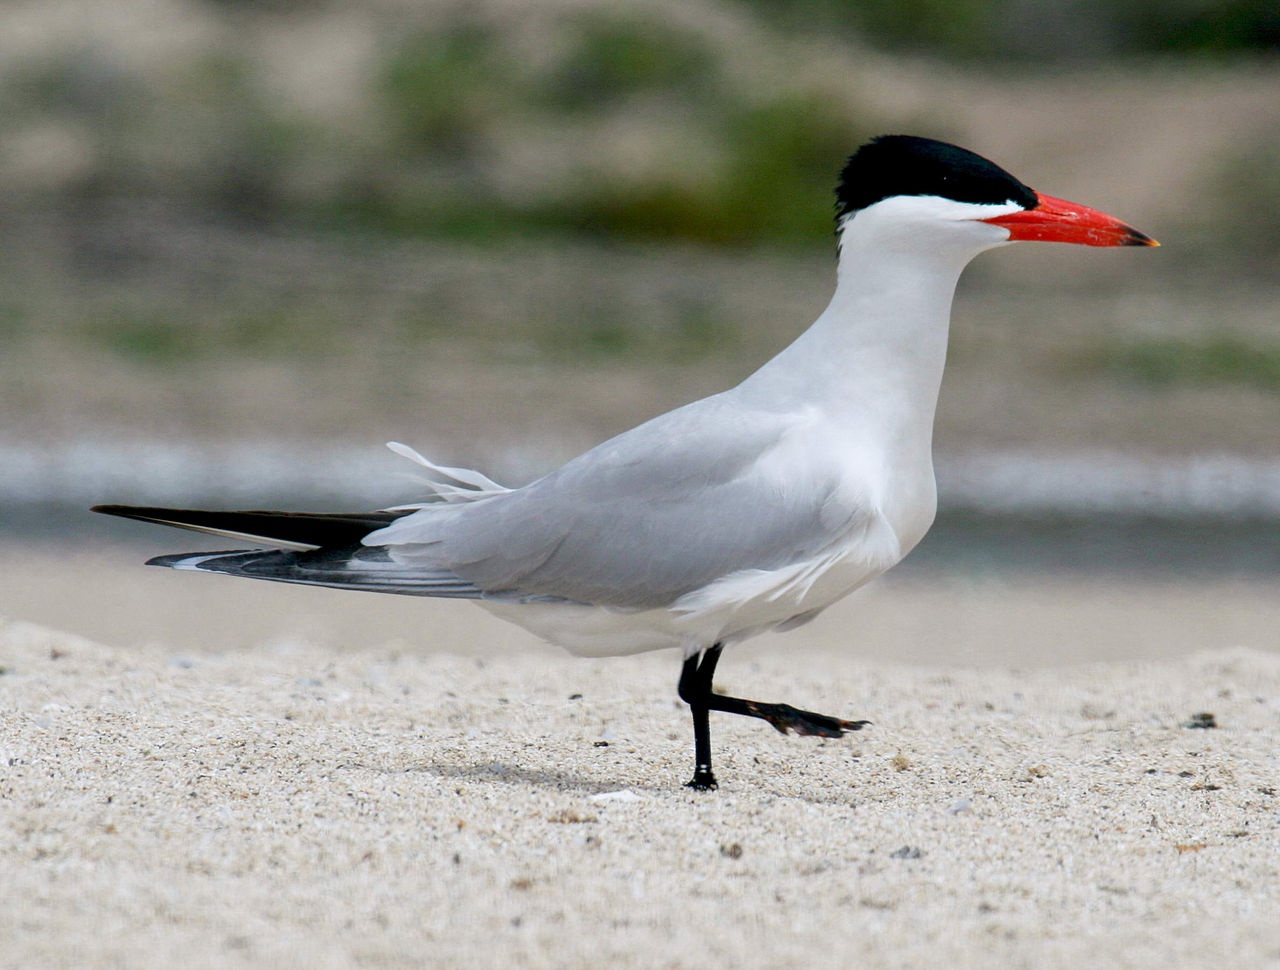 Sterne Caspienne - Hydroprogne caspia - <a href='https://commons.wikimedia.org/wiki/File:Caspian_Tern_(Hydroprogne_caspia)_RWD.jpg' title='via Wikimedia Commons'>Dick Daniels (http://carolinabirds.org/)</a> / <a href='https://creativecommons.org/licenses/by-sa/3.0'>CC BY-SA</a> - BioObs